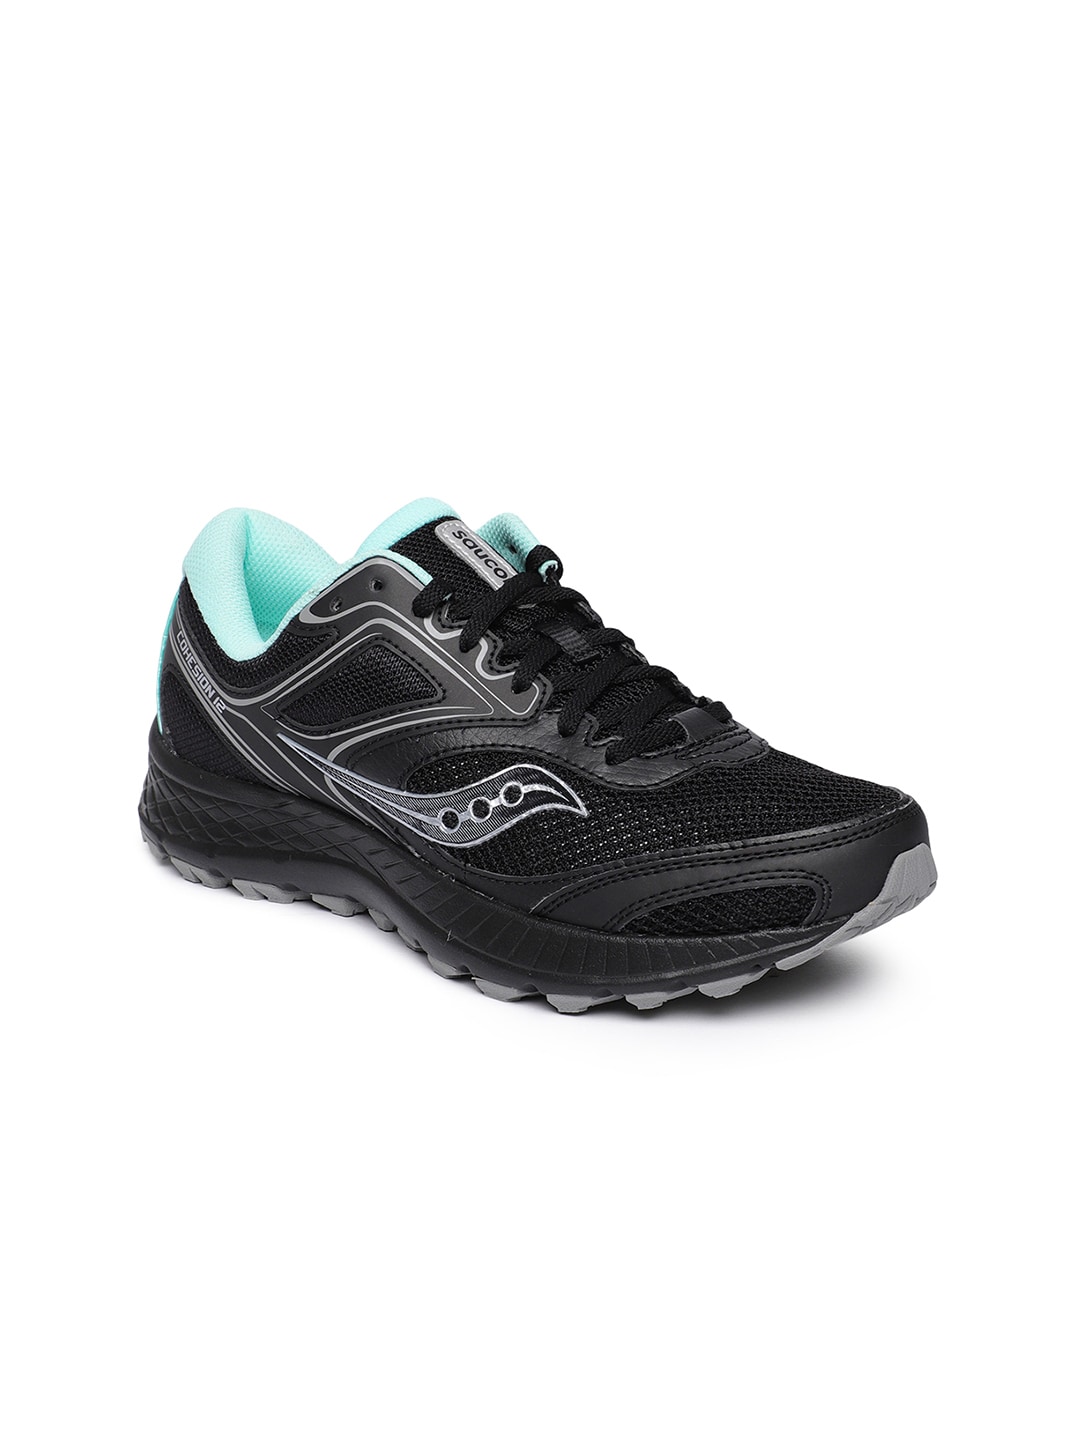 saucony running shoes india